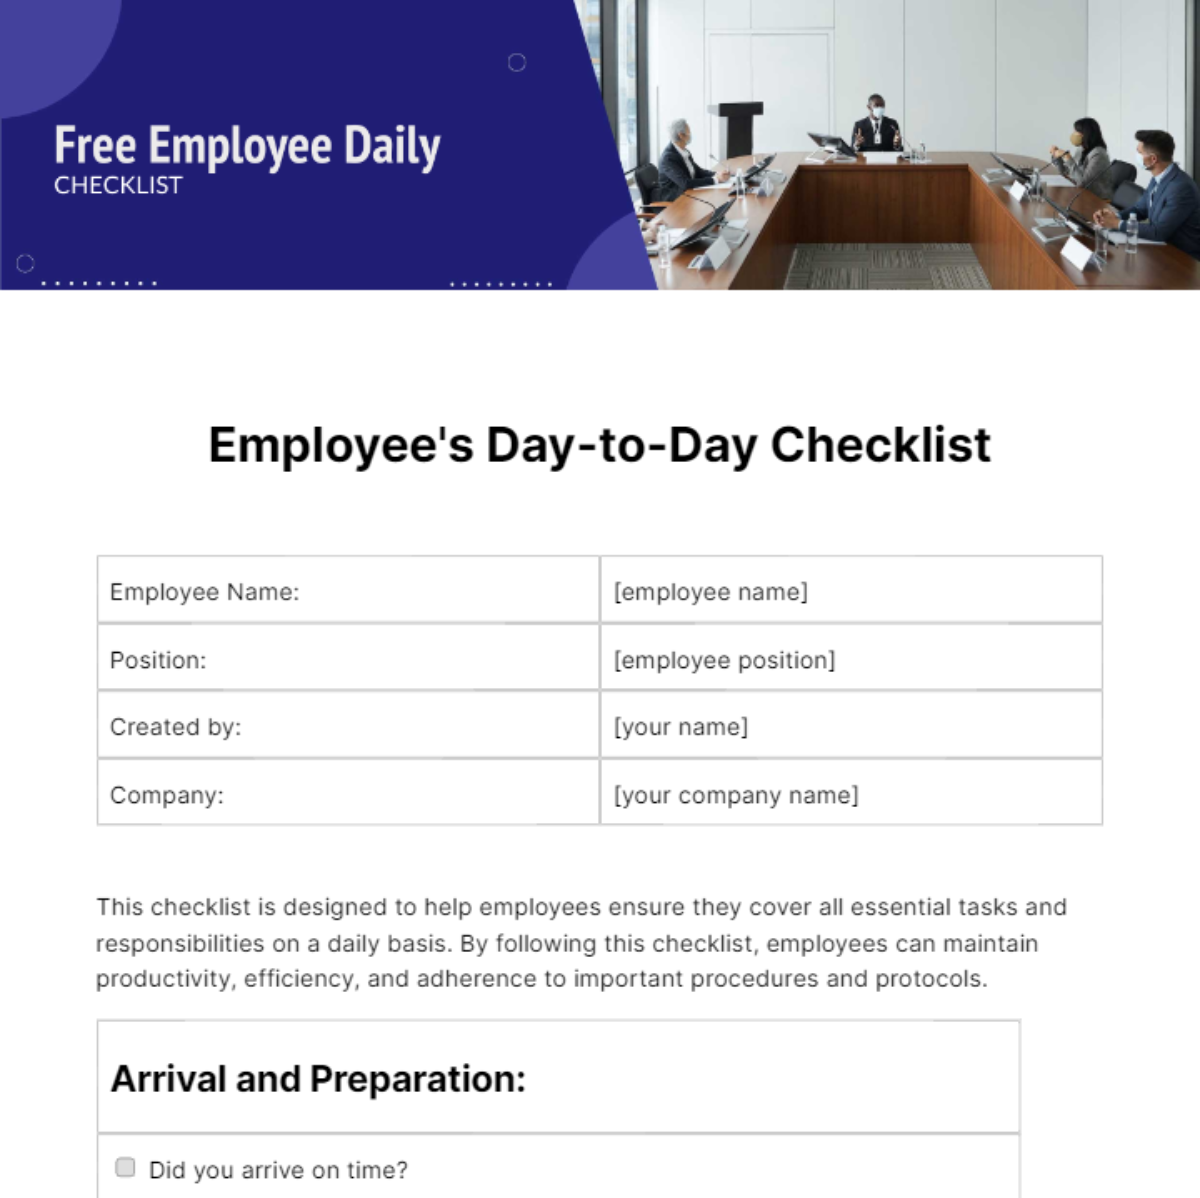 Free Employee Daily Checklist Template